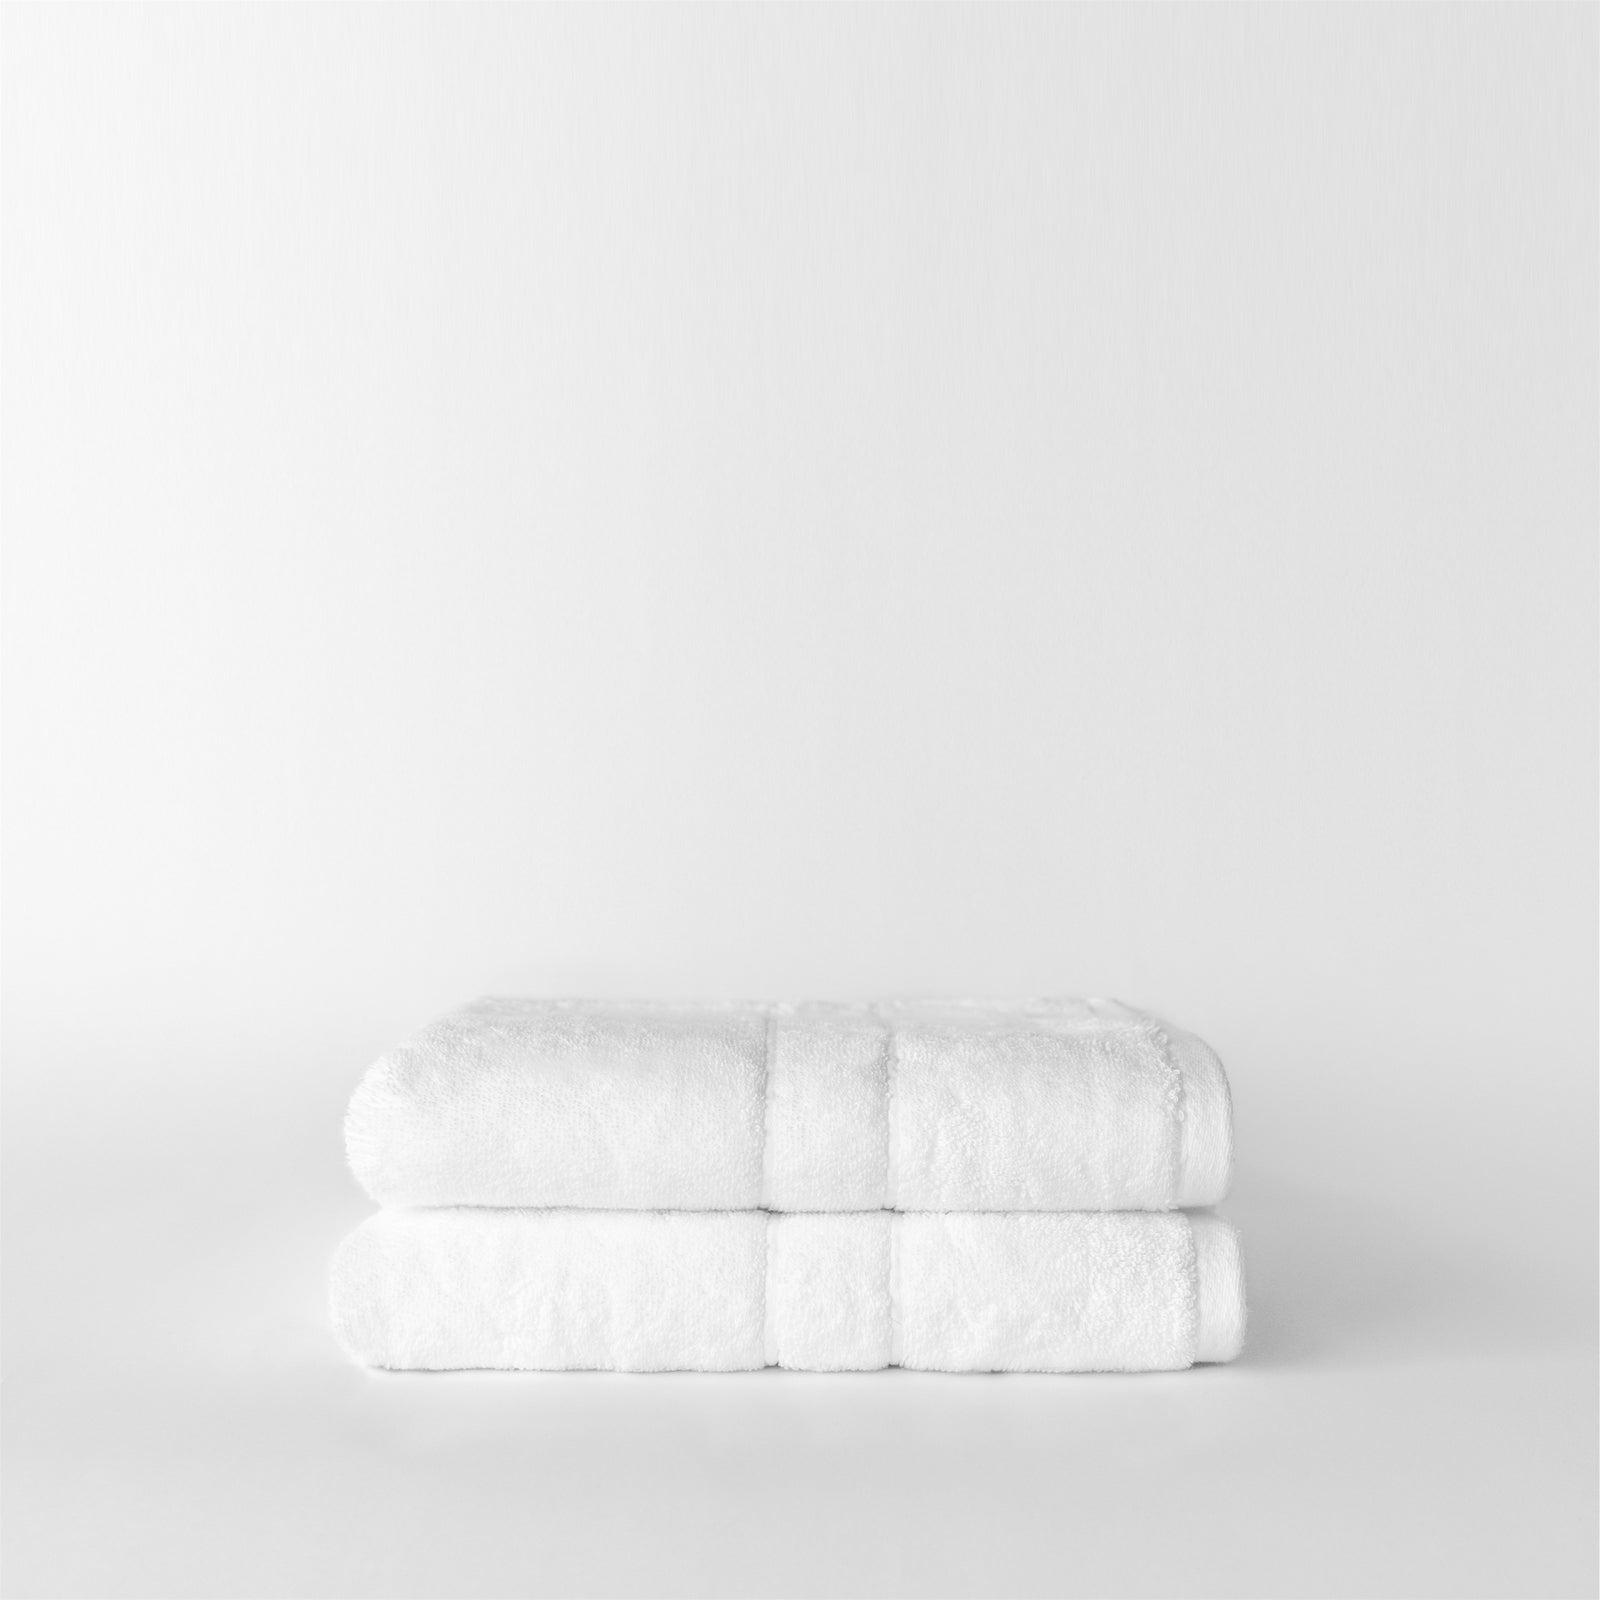 Premium Plush Hand Towels in the color white. Photo of Complete Premium Plush Hand Towel taken with white background 